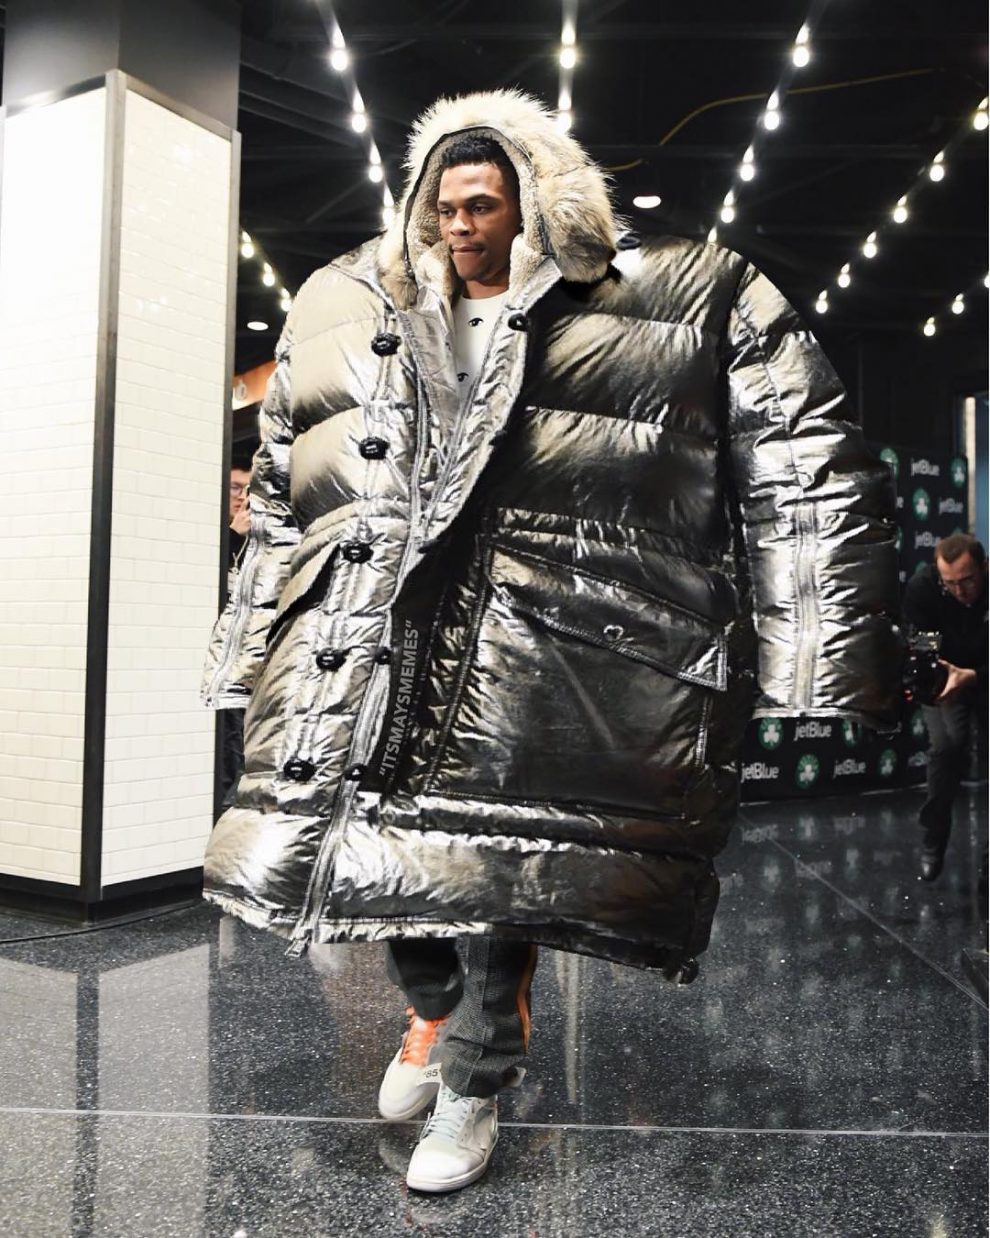 Big-Jacket Memes Are Coming To An Instagram Near You » Design You Trust ...